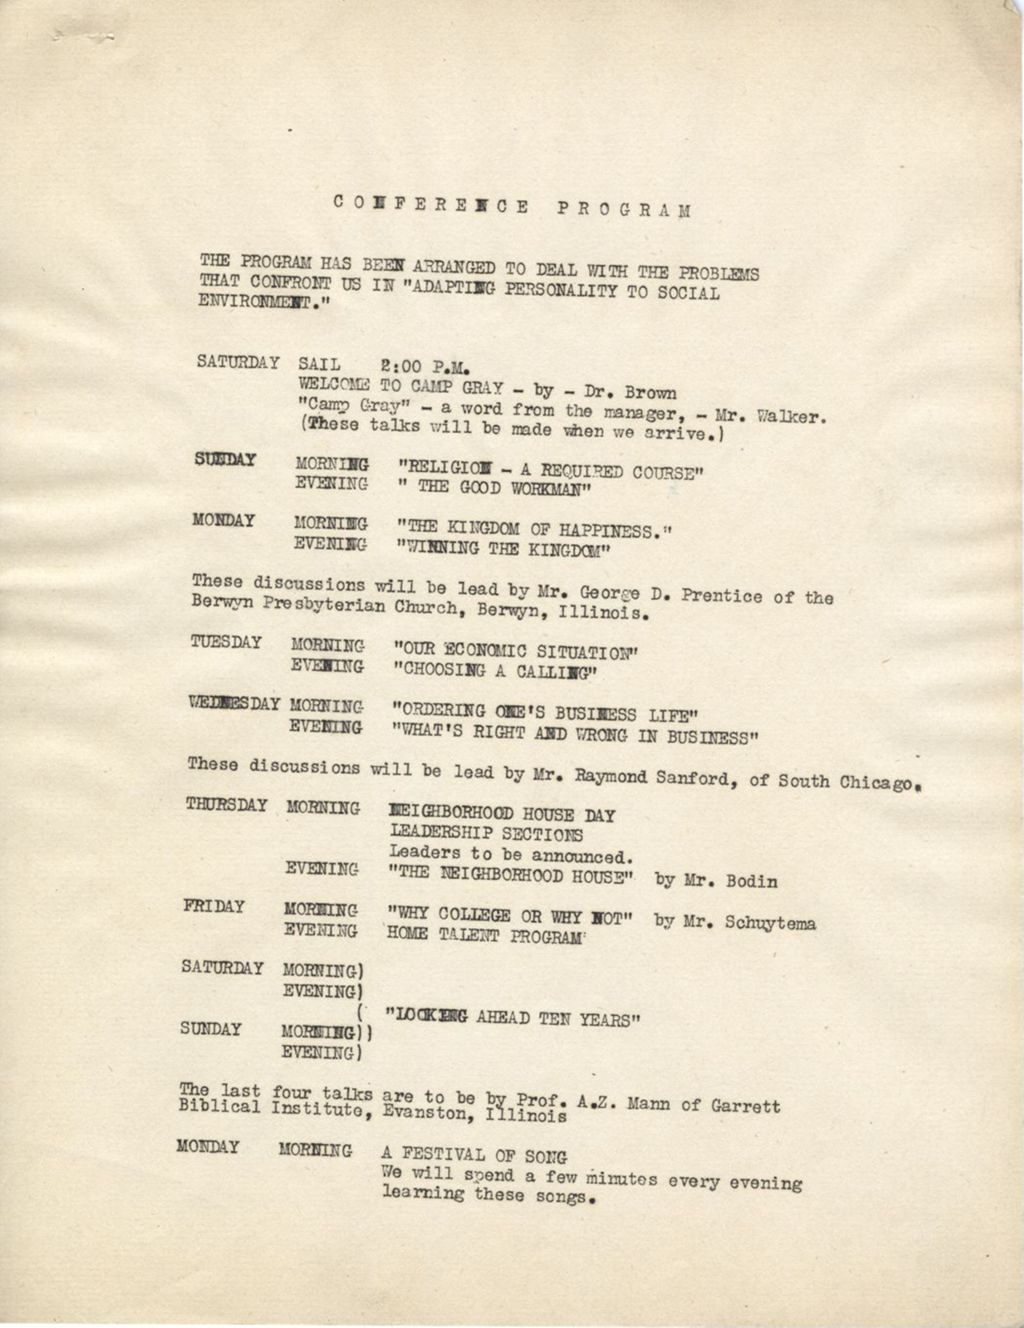 Conference program of lectures at Camp Gray, p. 1